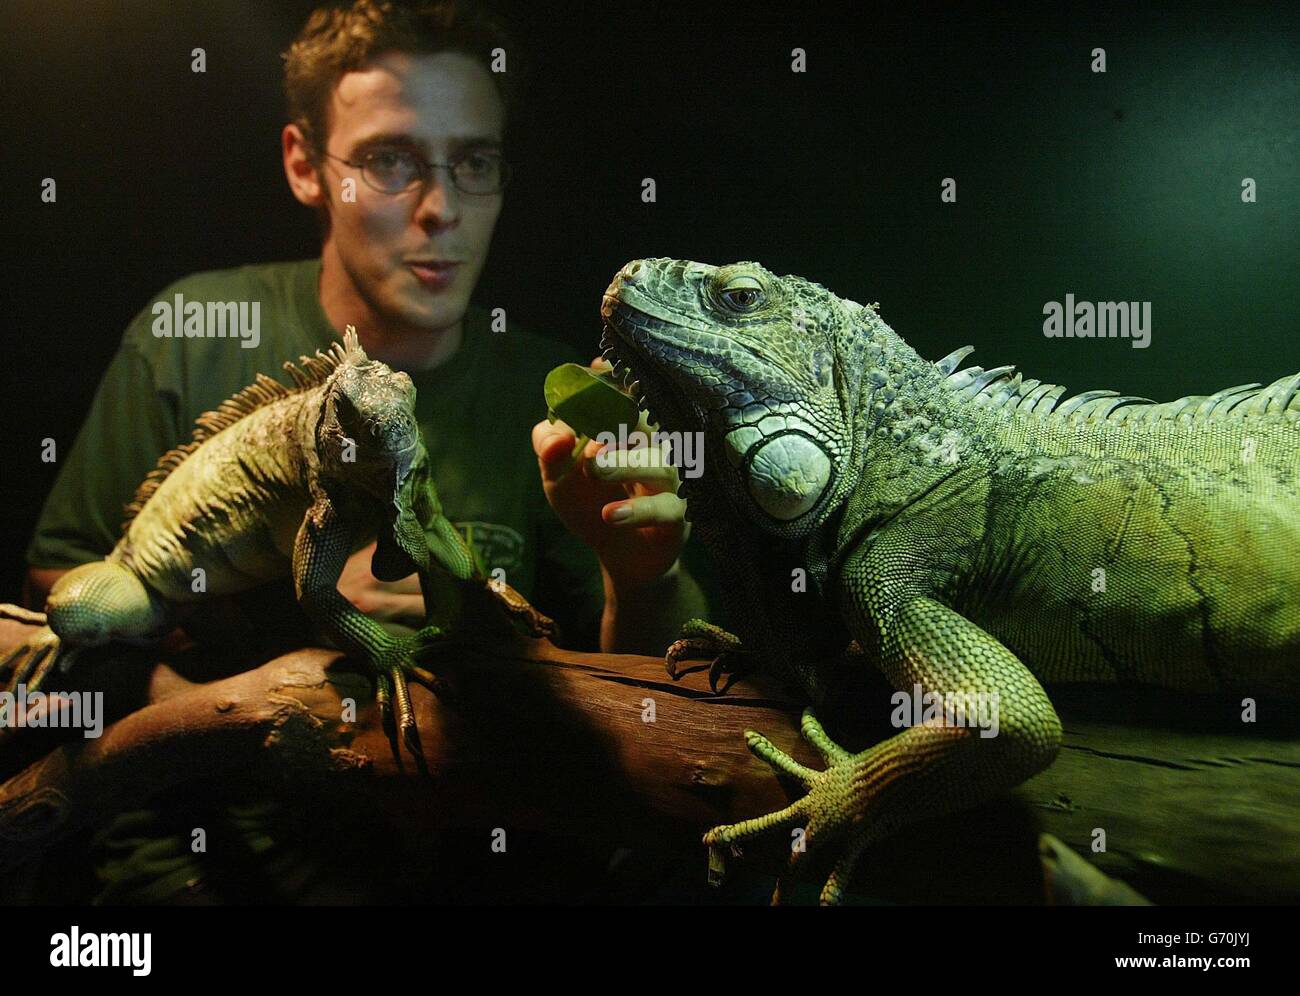 Curator Stewart Dodsworth, 23, with some of the rescued Iguanas on display at the Exotic Animal Welfare Trust in Tow Law, County Durham, as an RSPCA report claims that a 'considerable' number of exotic pet owners lack the experience or knowledge to properly look after their animals. A large part of the blame is put down to poor standards of help and advice offered to novice owners by pet shops, with the report also highlighting a lack of vets able to provide treatment for exotic animals. Stock Photo